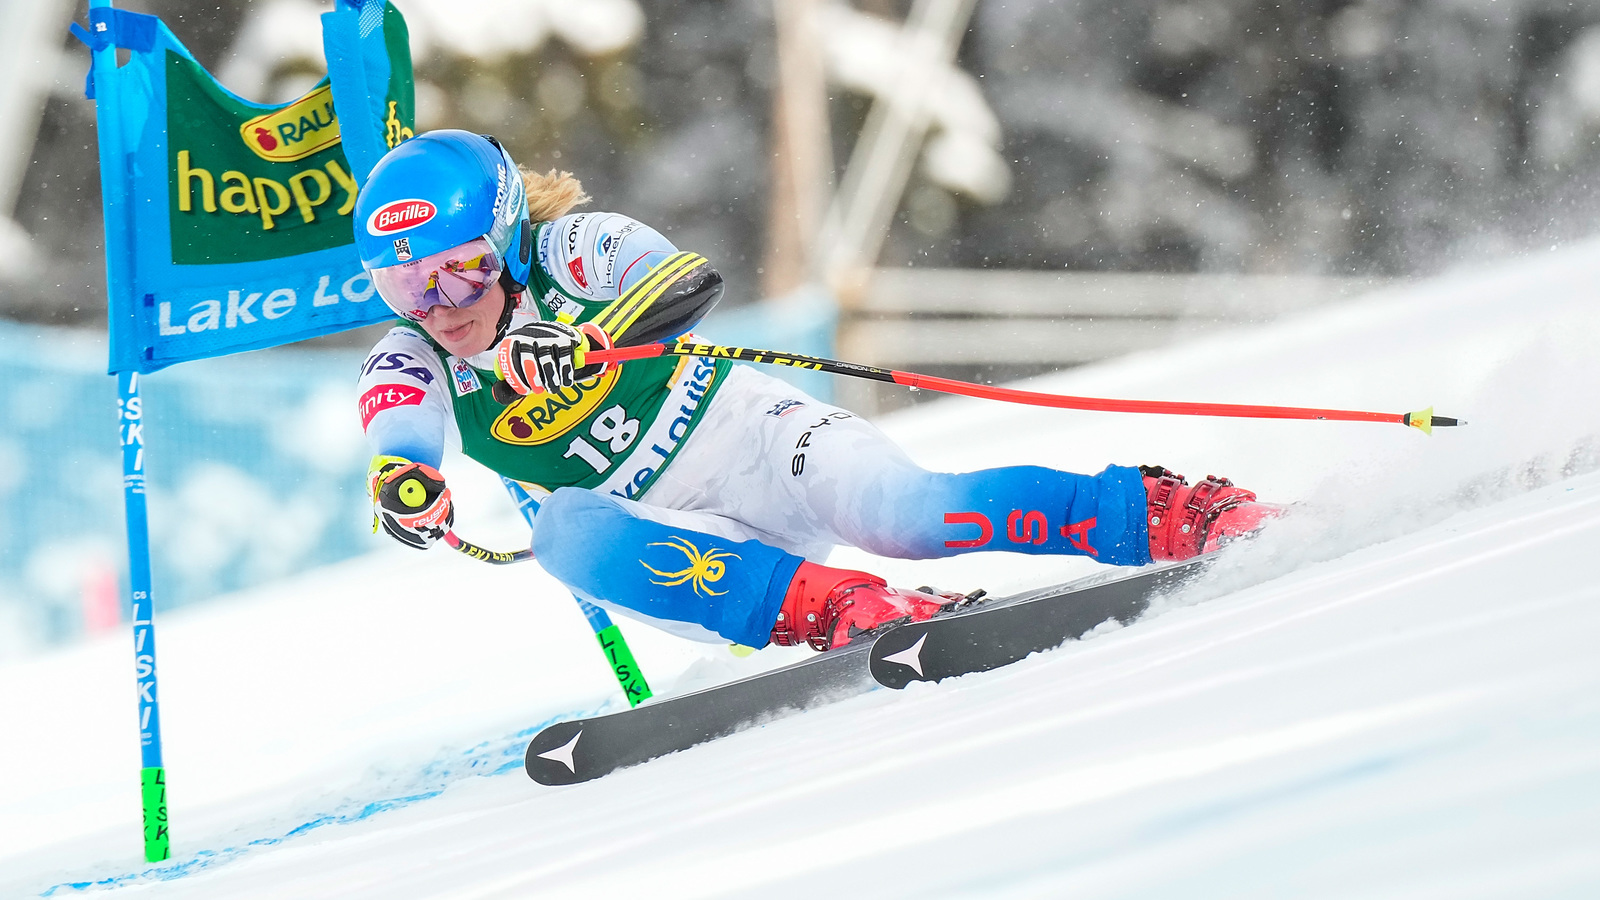 10 U.S. athletes to watch at the 2022 Winter Olympics in Beijing